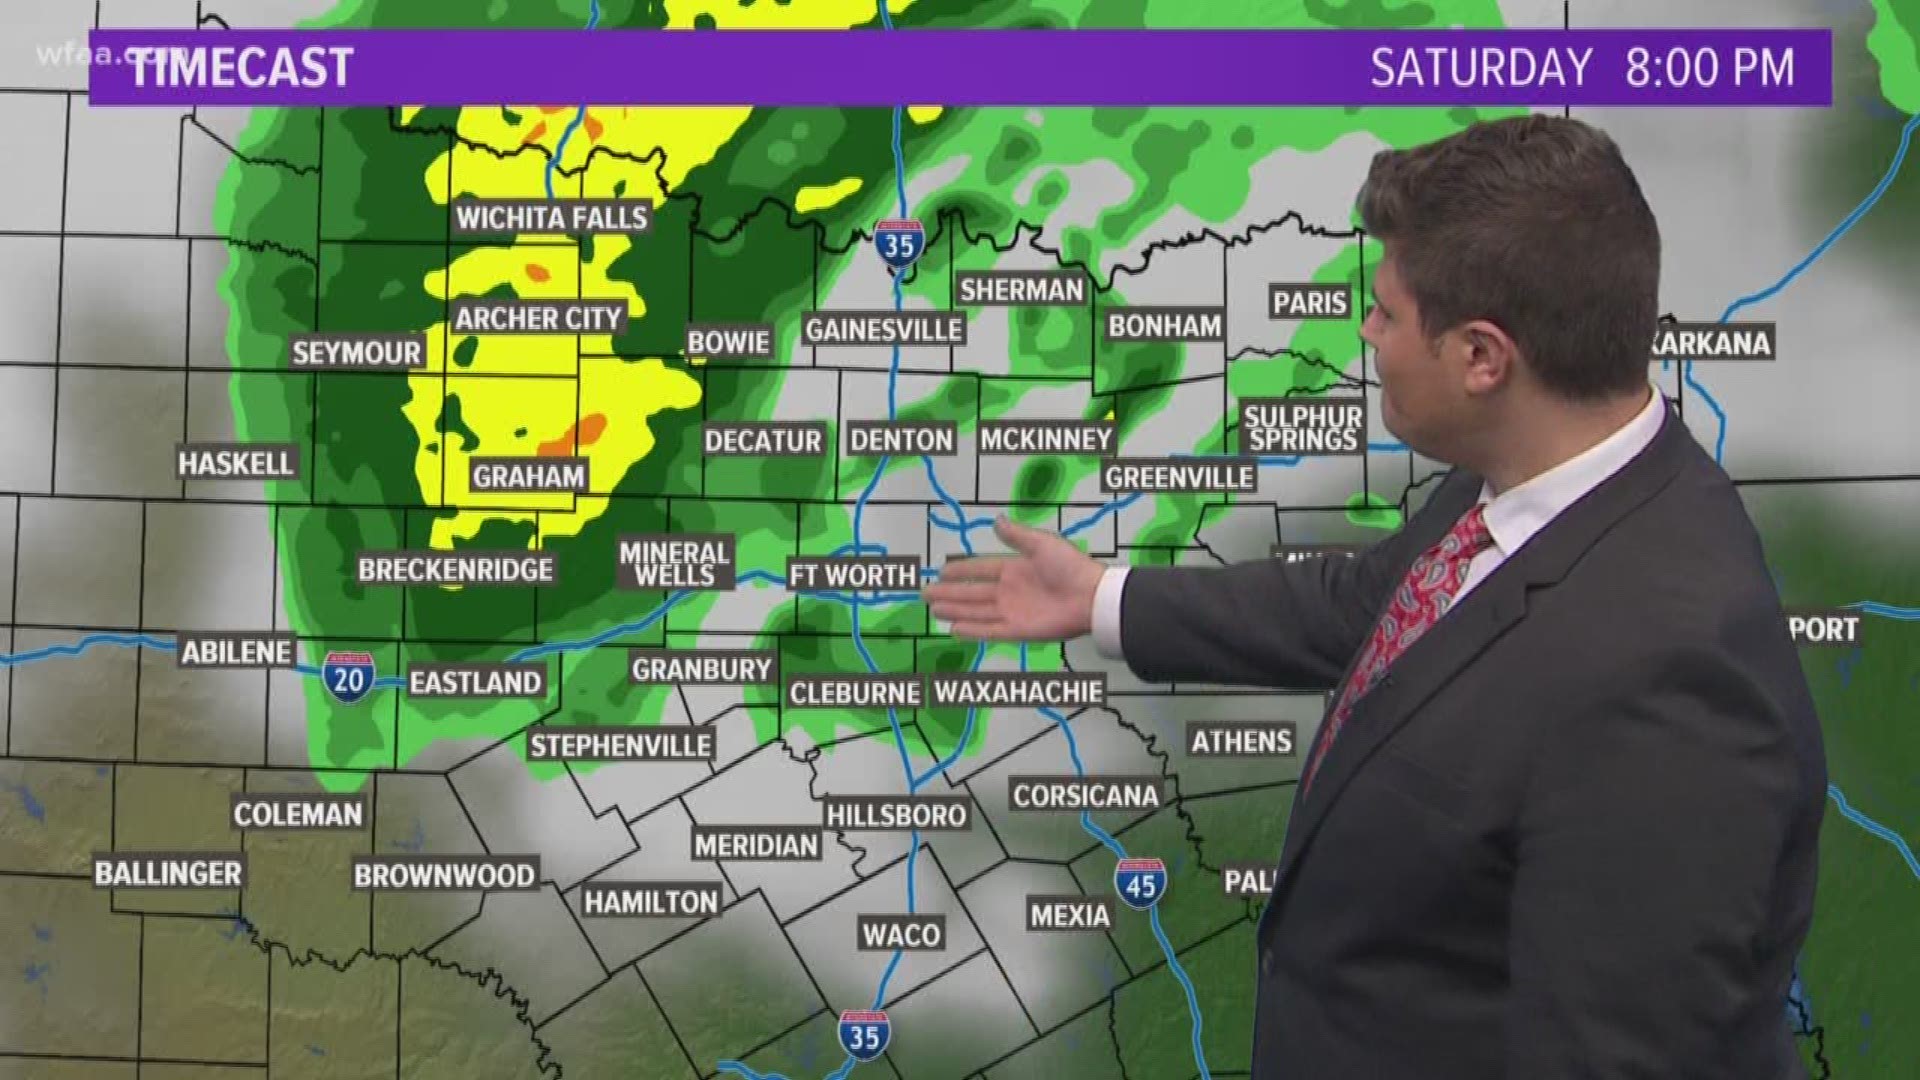 Scattered showers are forecast, but the worst of the storms are over for the metroplex area.